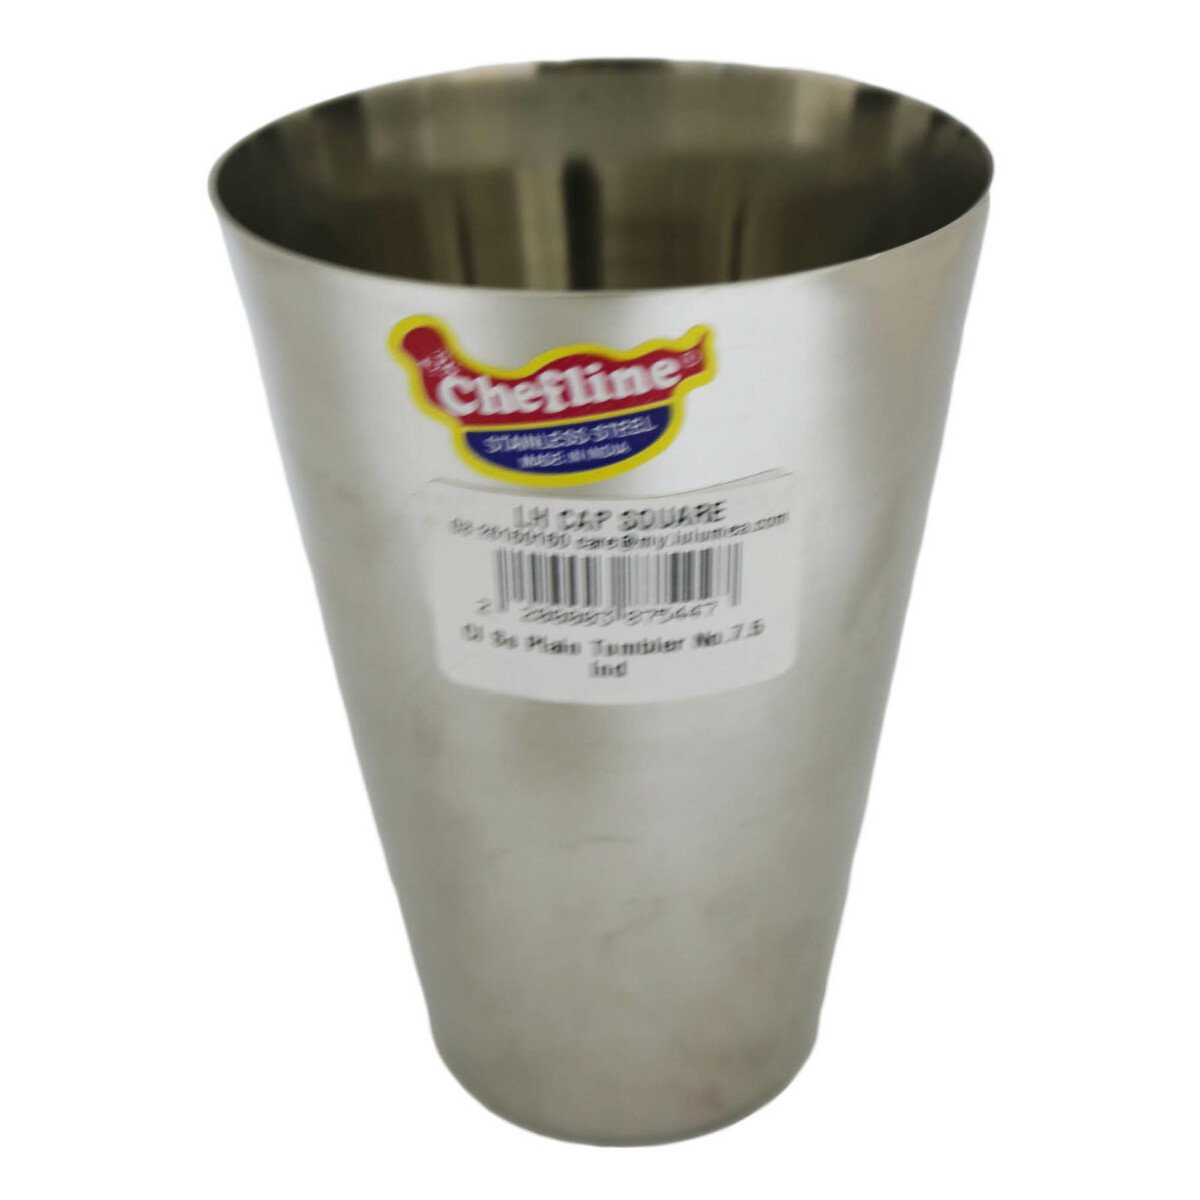 Chefline Stainless Steel Plain Tumbler No.7.5 Ind